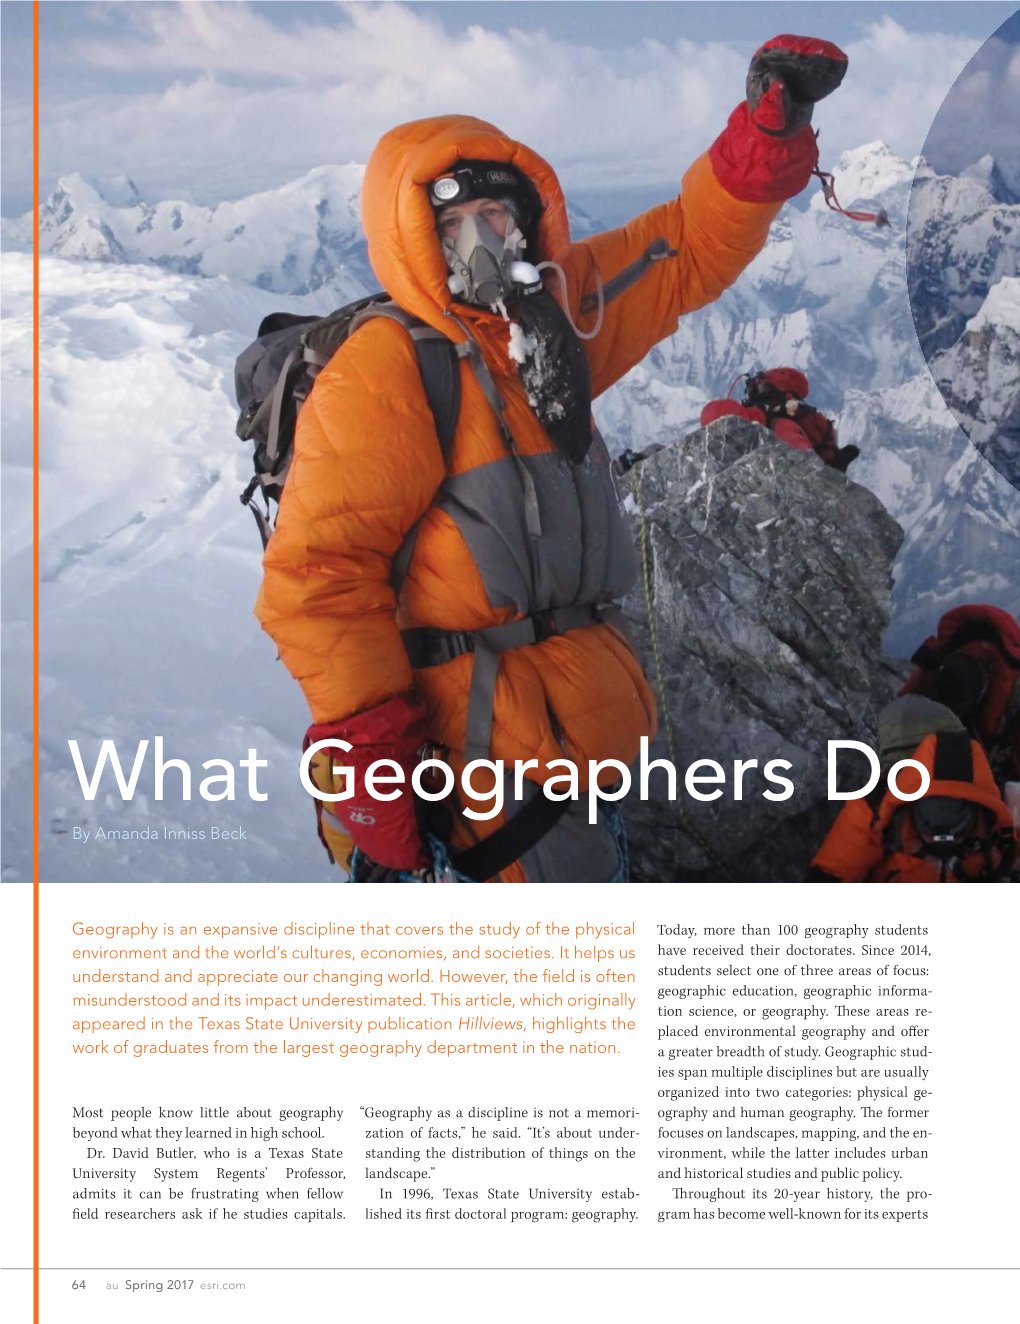 What Geographers Do by Amanda Inniss Beck